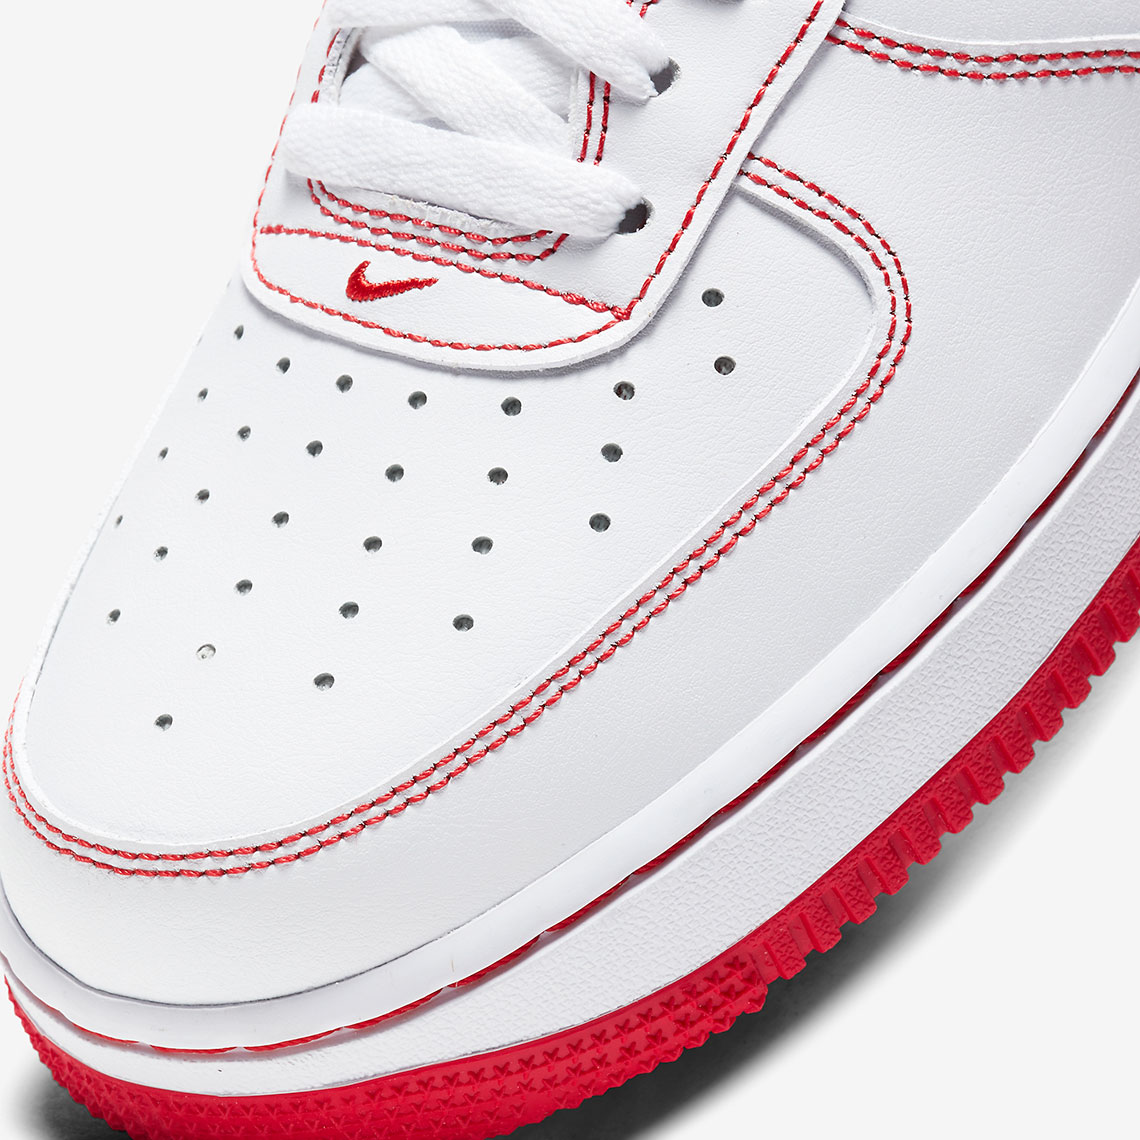 Nike Air Force 1 Low White University Red Cv1724 100 5